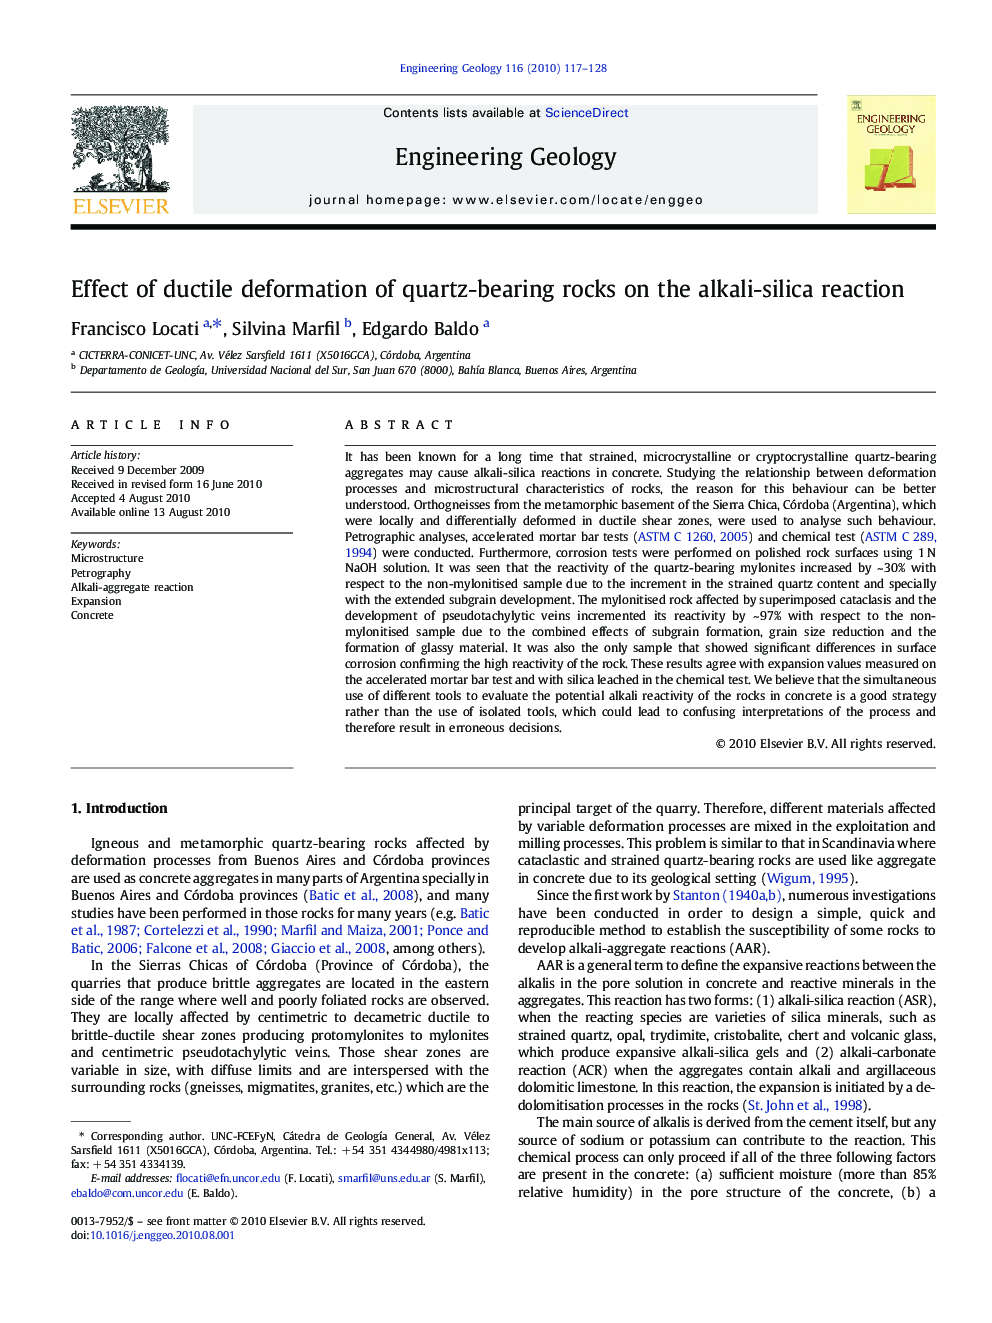 Effect of ductile deformation of quartz-bearing rocks on the alkali-silica reaction